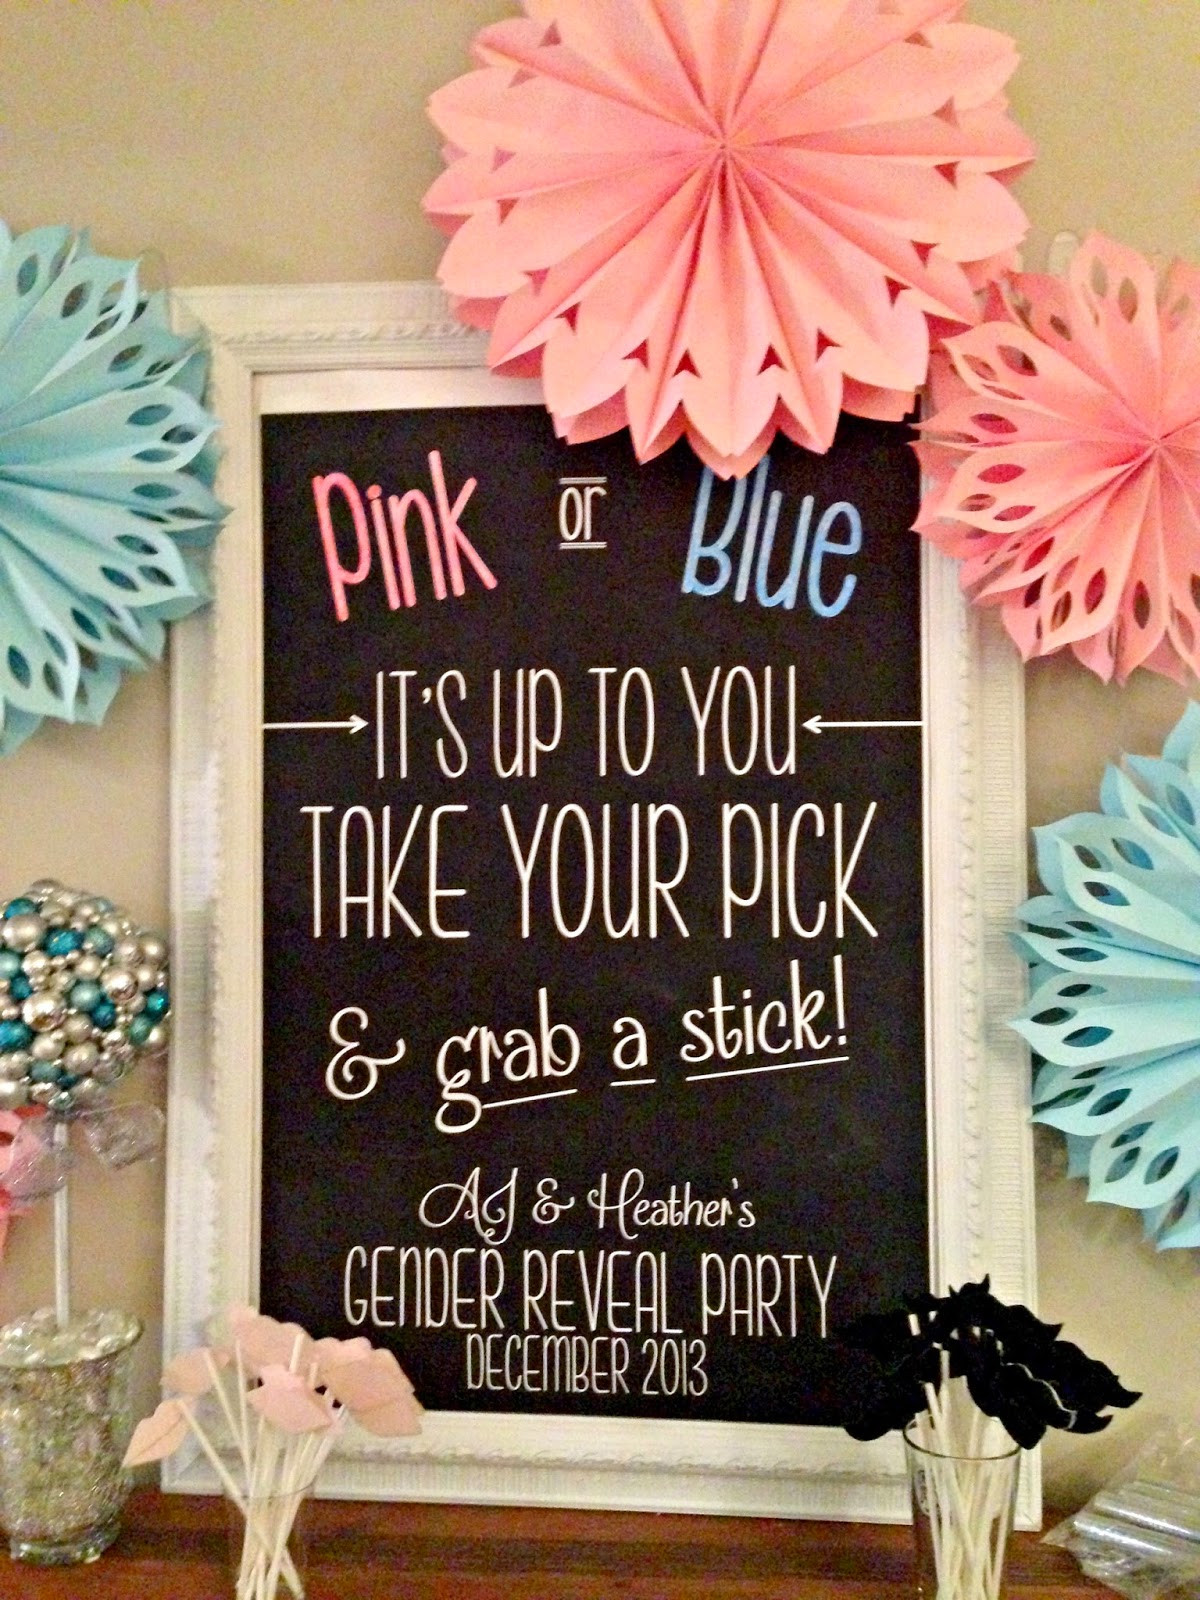 Cute Gender Reveal Party Ideas
 It s a pretty Prins life Gender Reveal Party